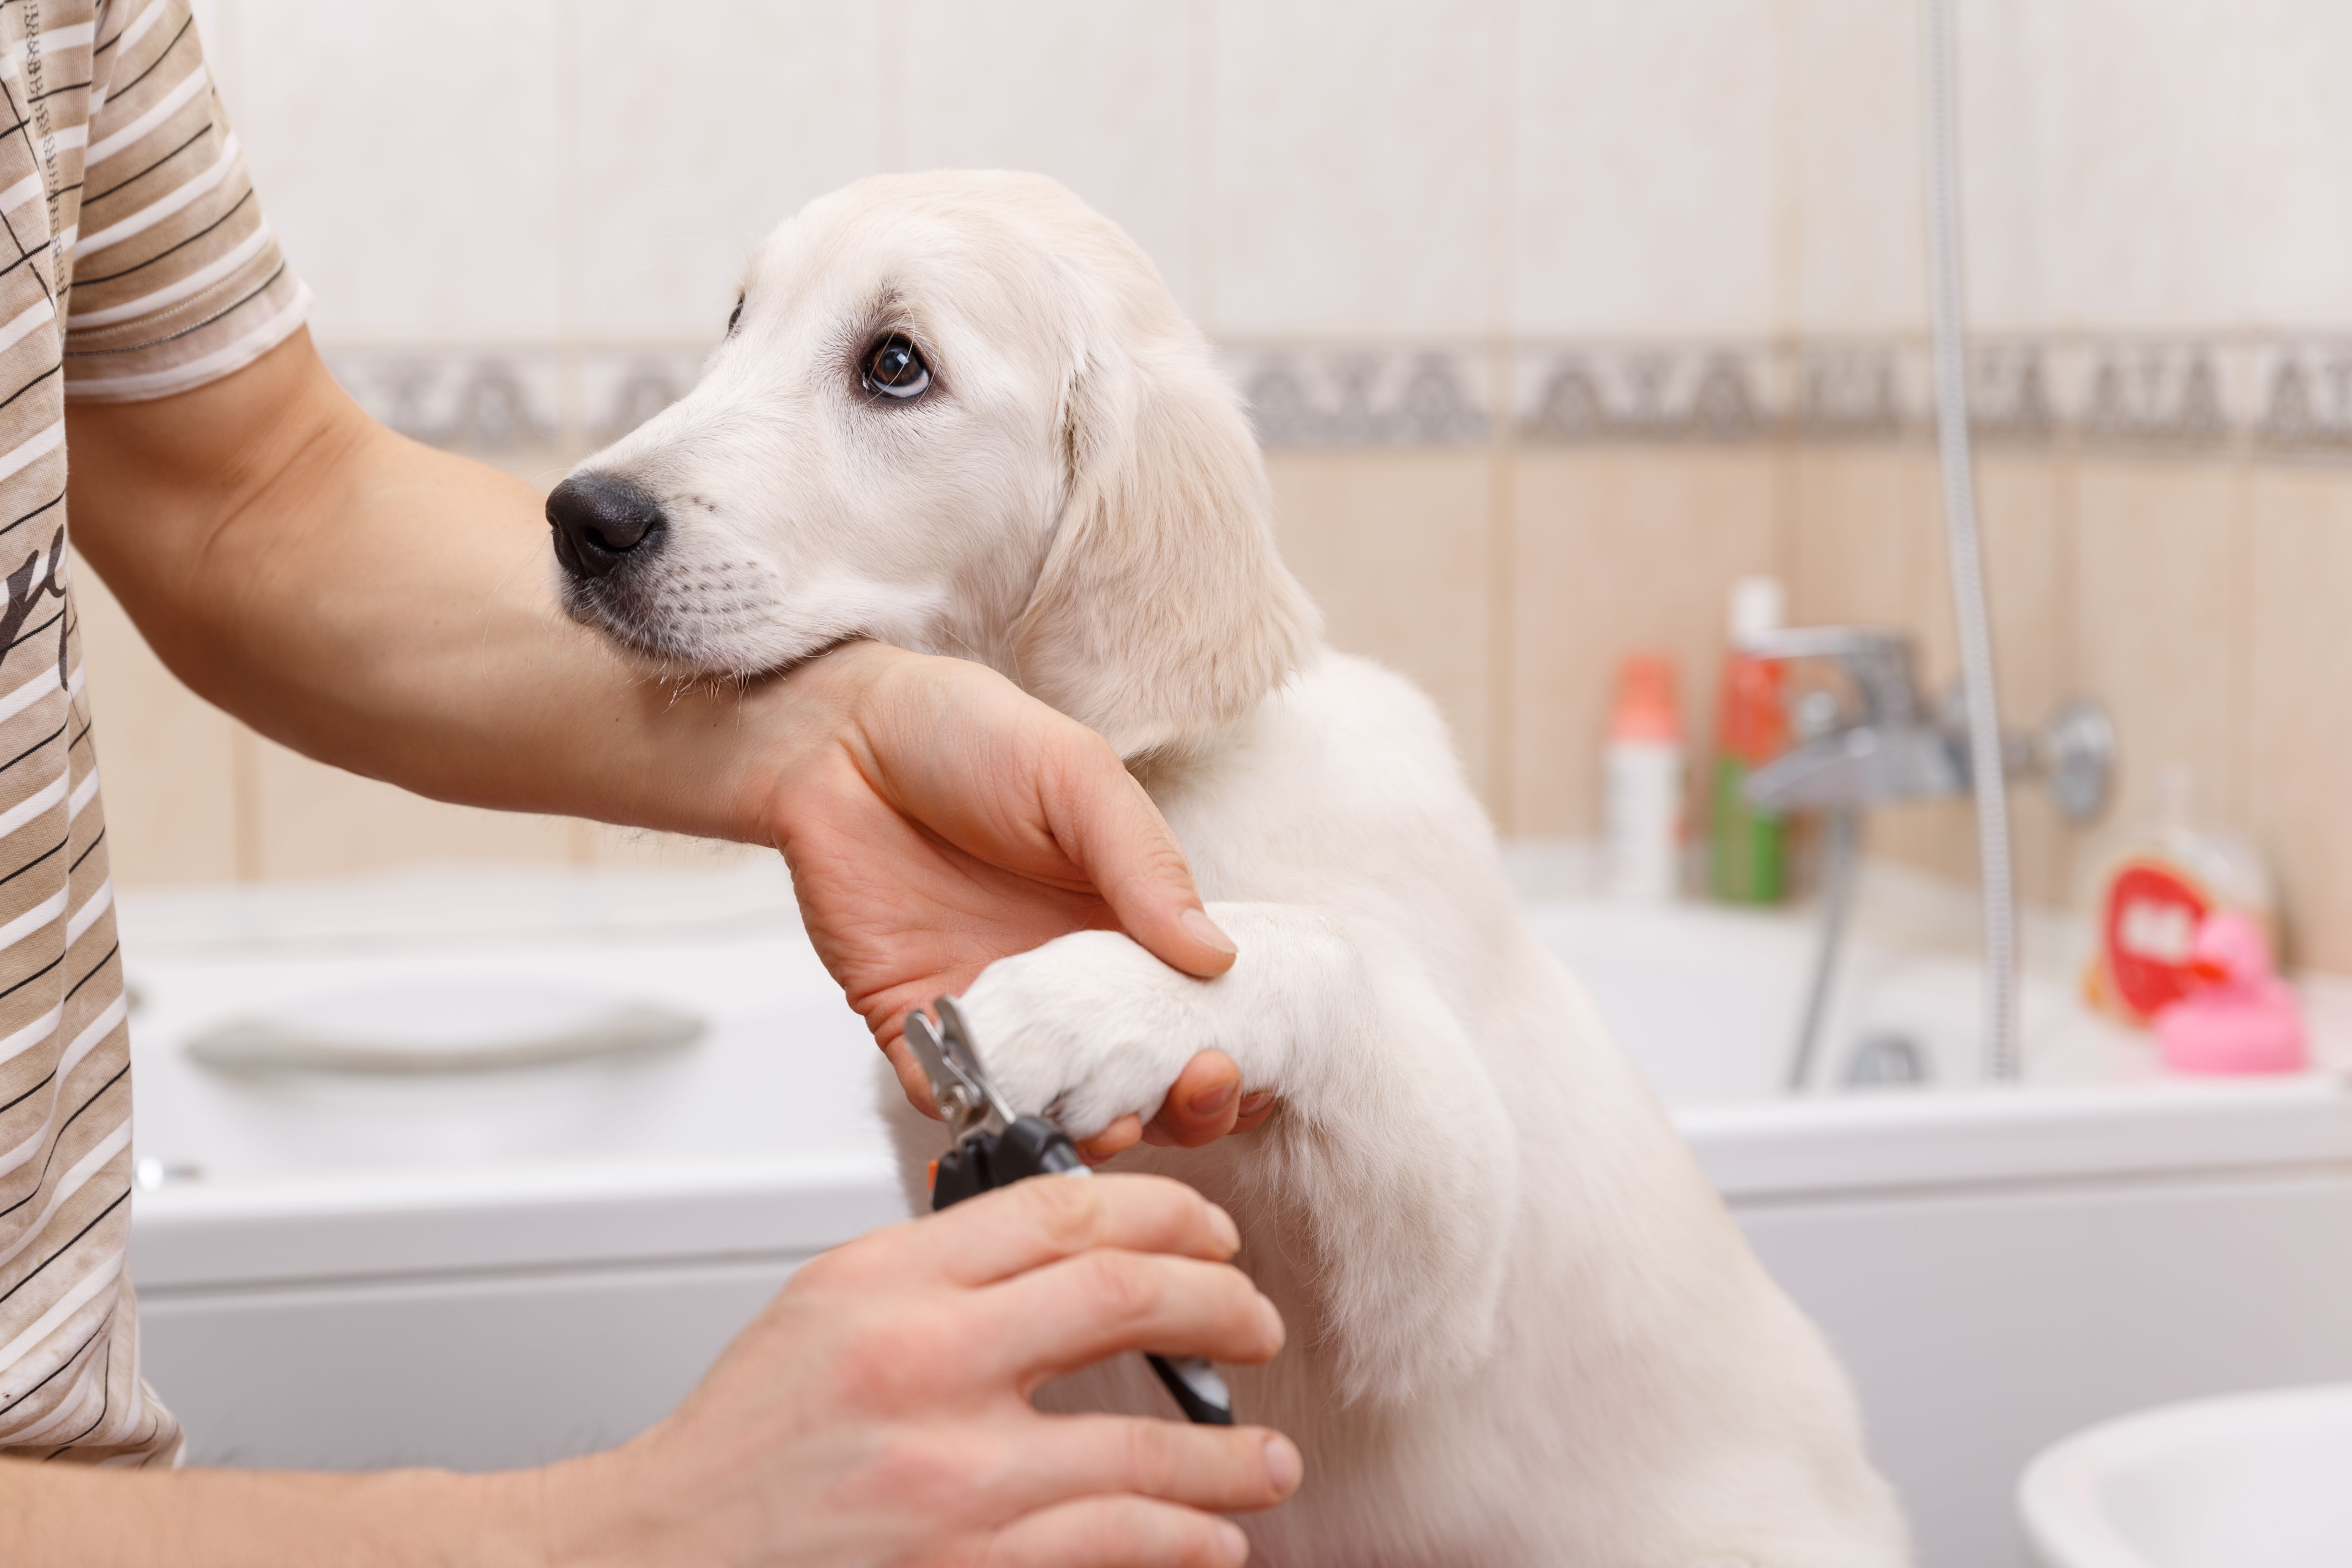 How to Prepare Your Puppy for the Groomer